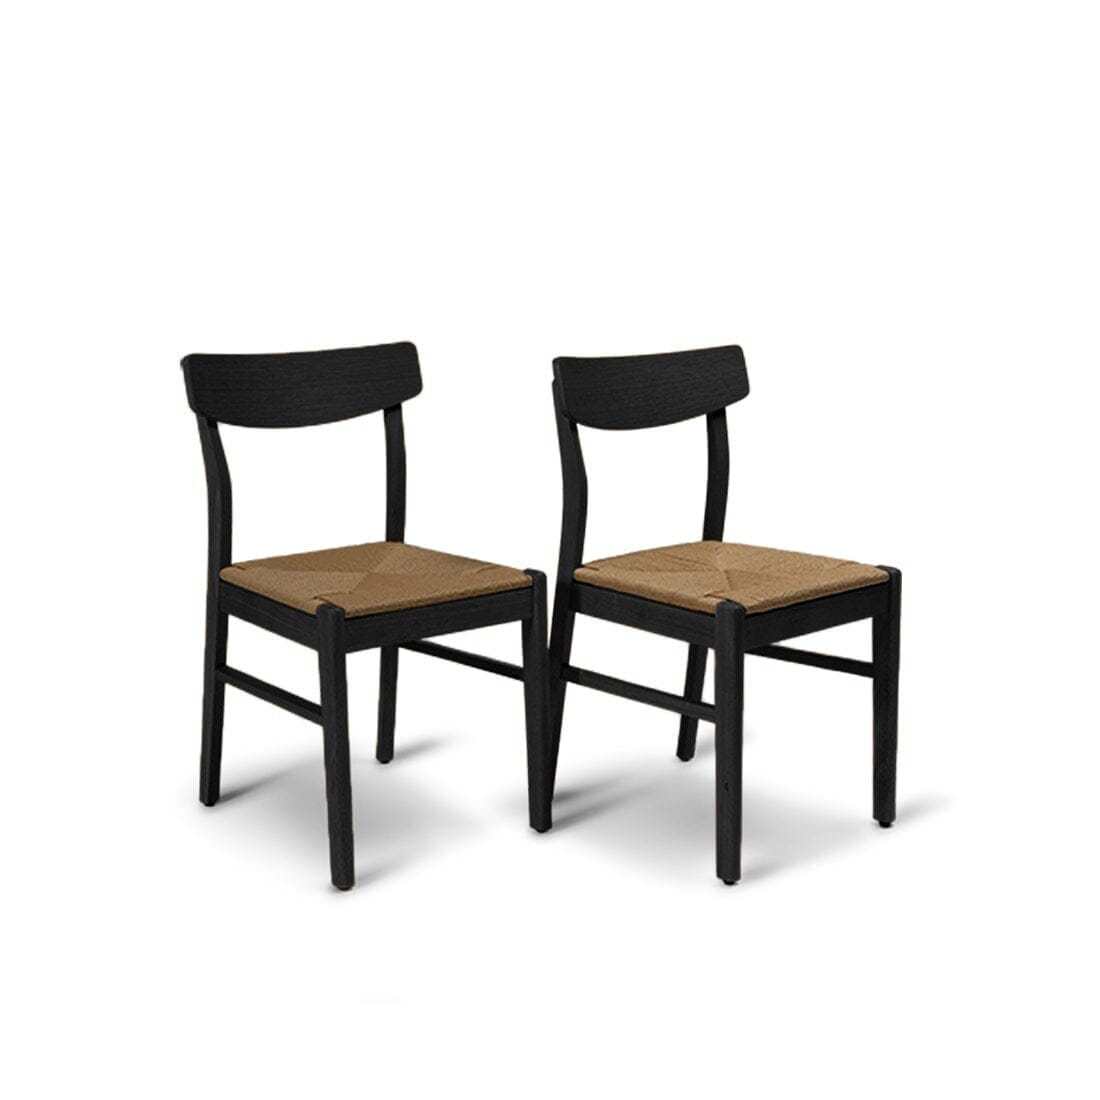 Wooden Woven Chairs Set 2 - Black - Laura James